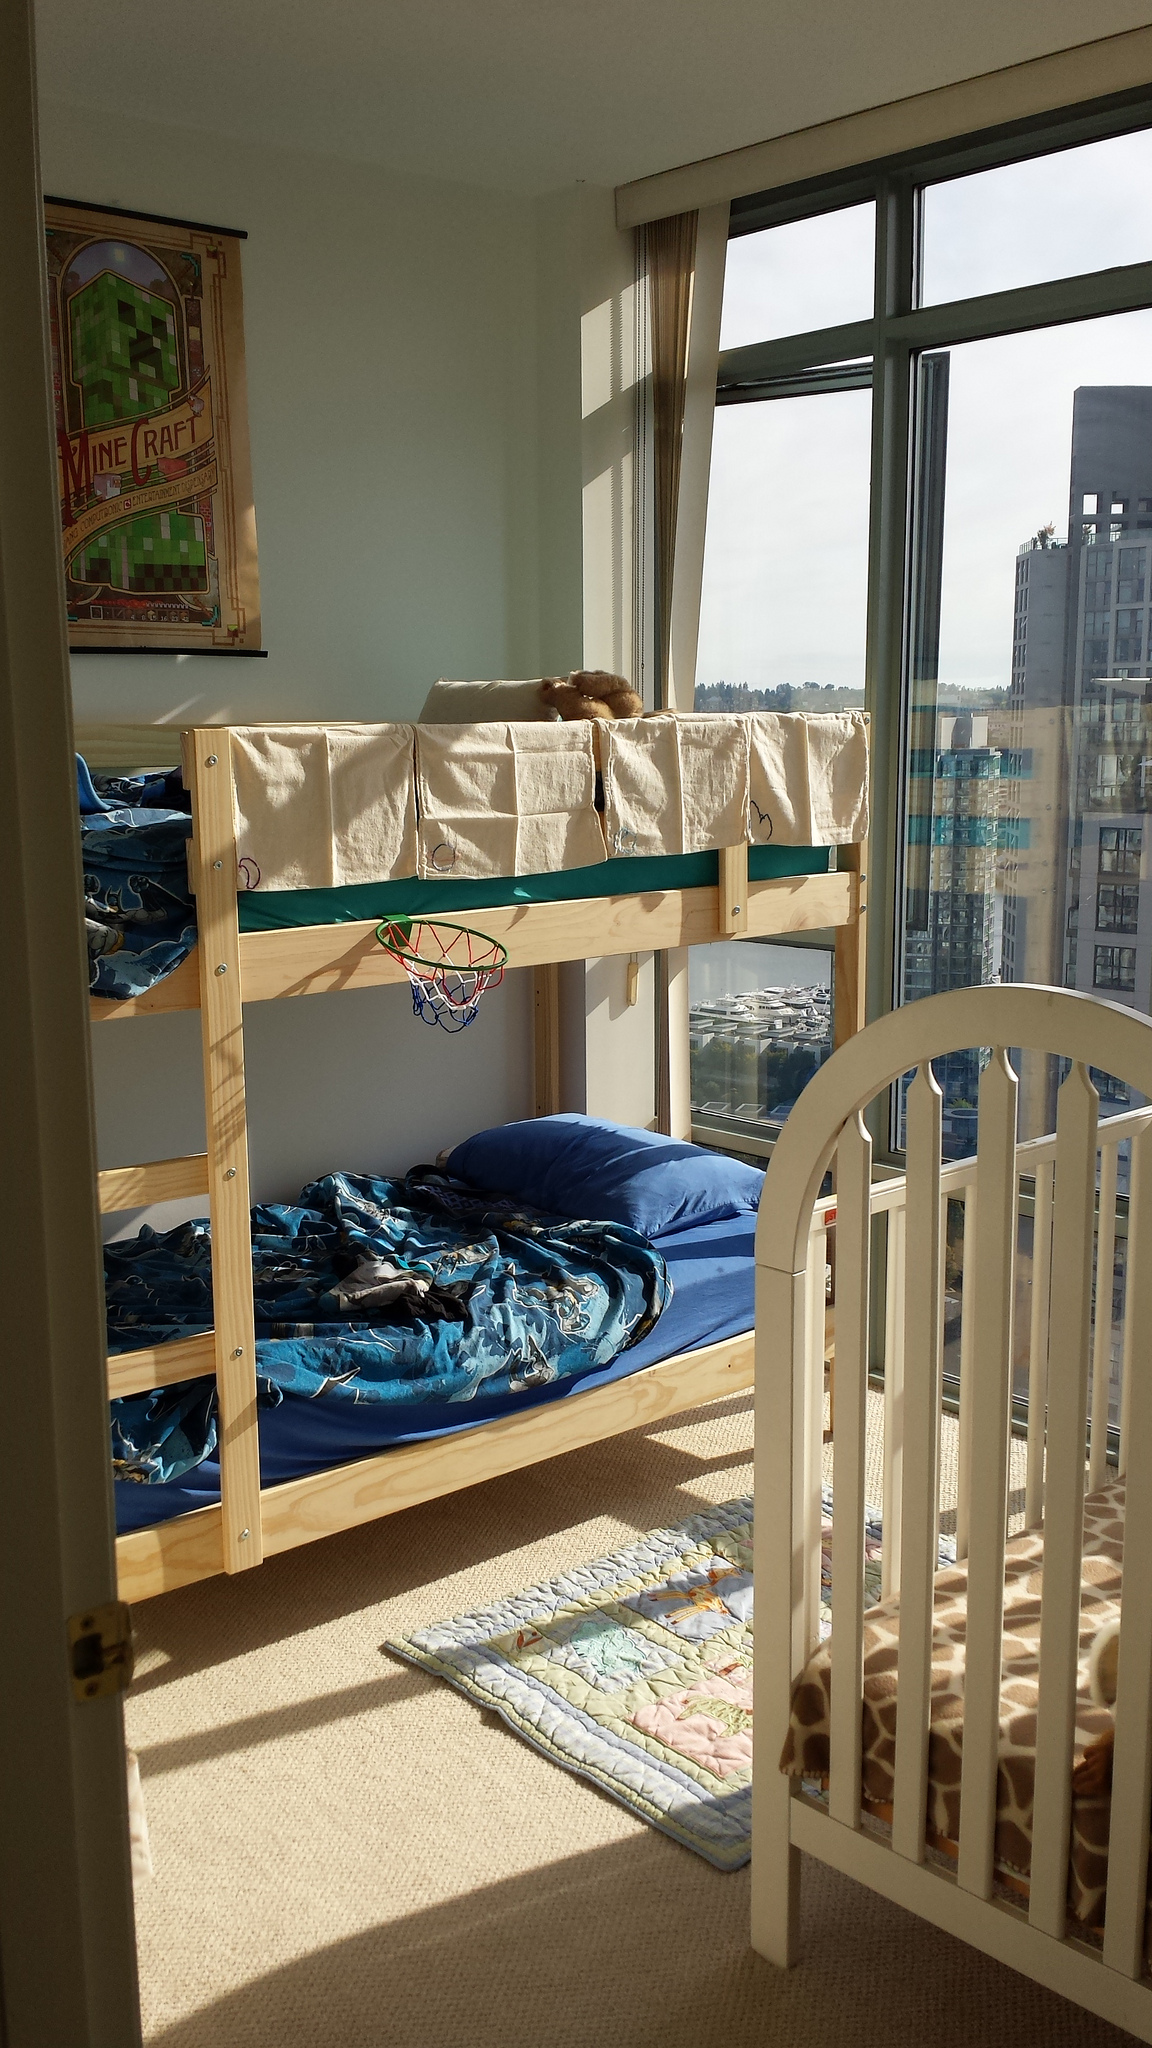 Ikea Ing Your Way To Kid Stacking, Triple Bunk Bed Ikea